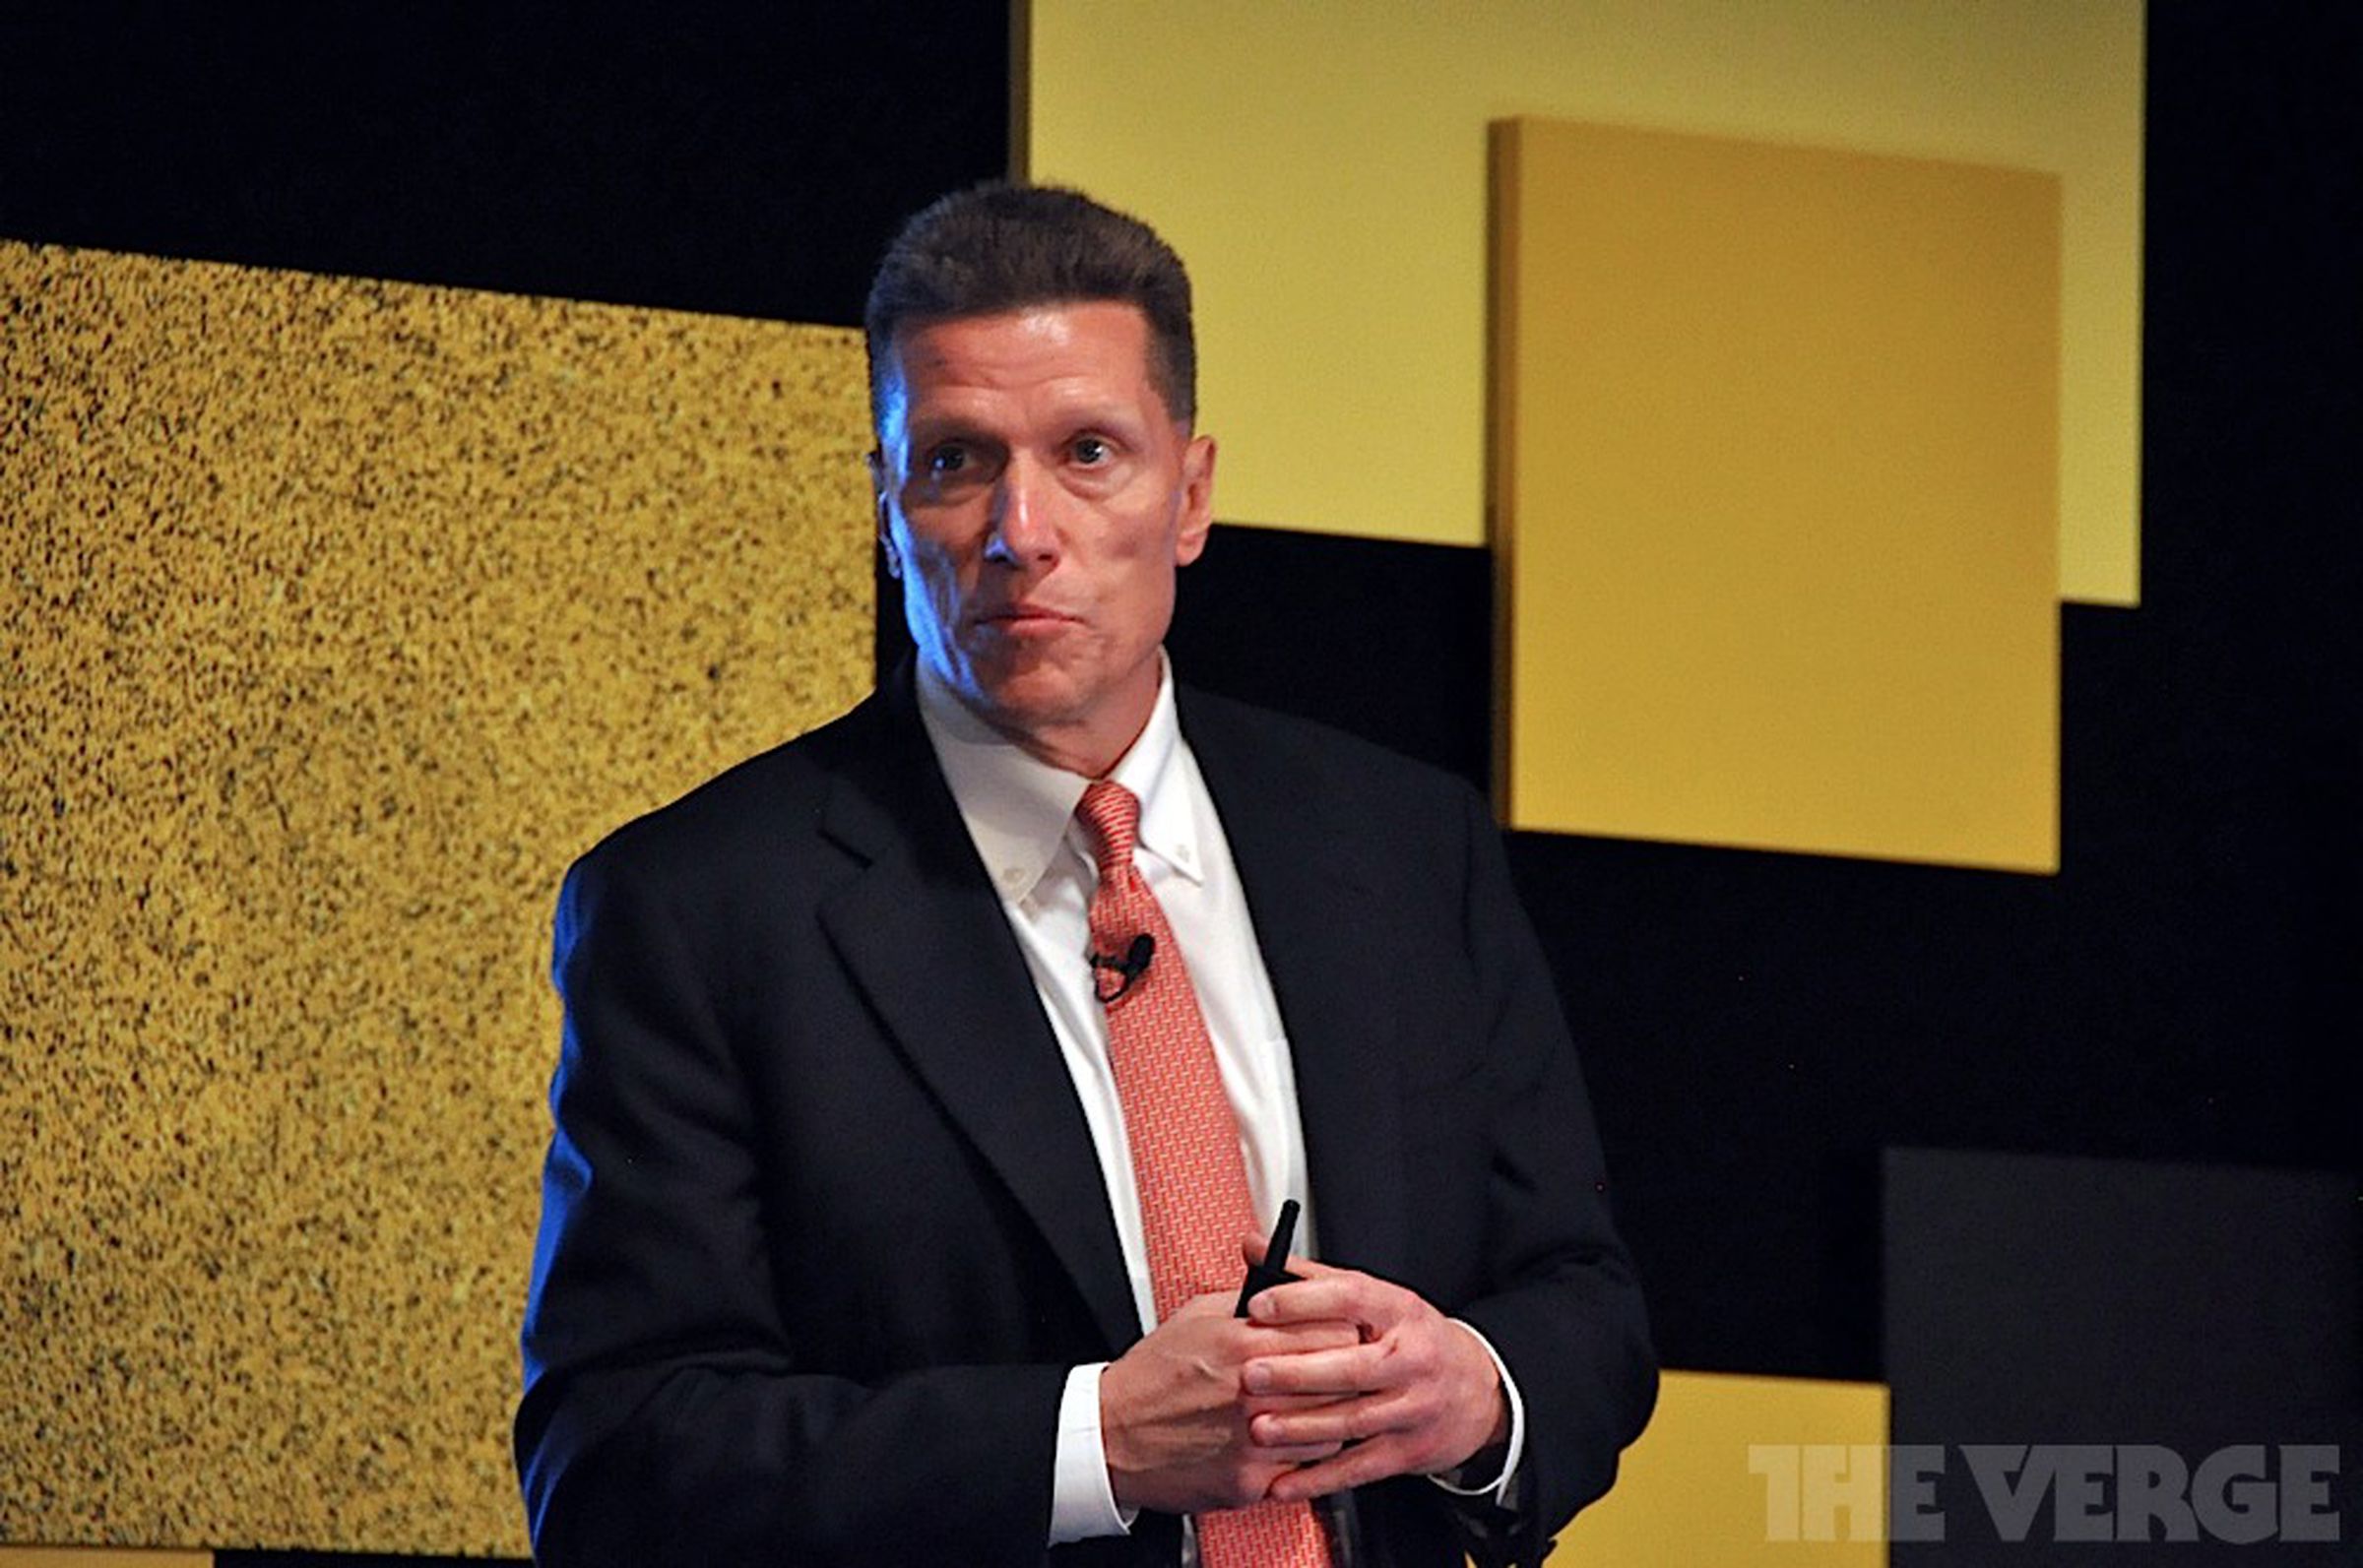 Sprint's 2011 Strategy Update event highlights